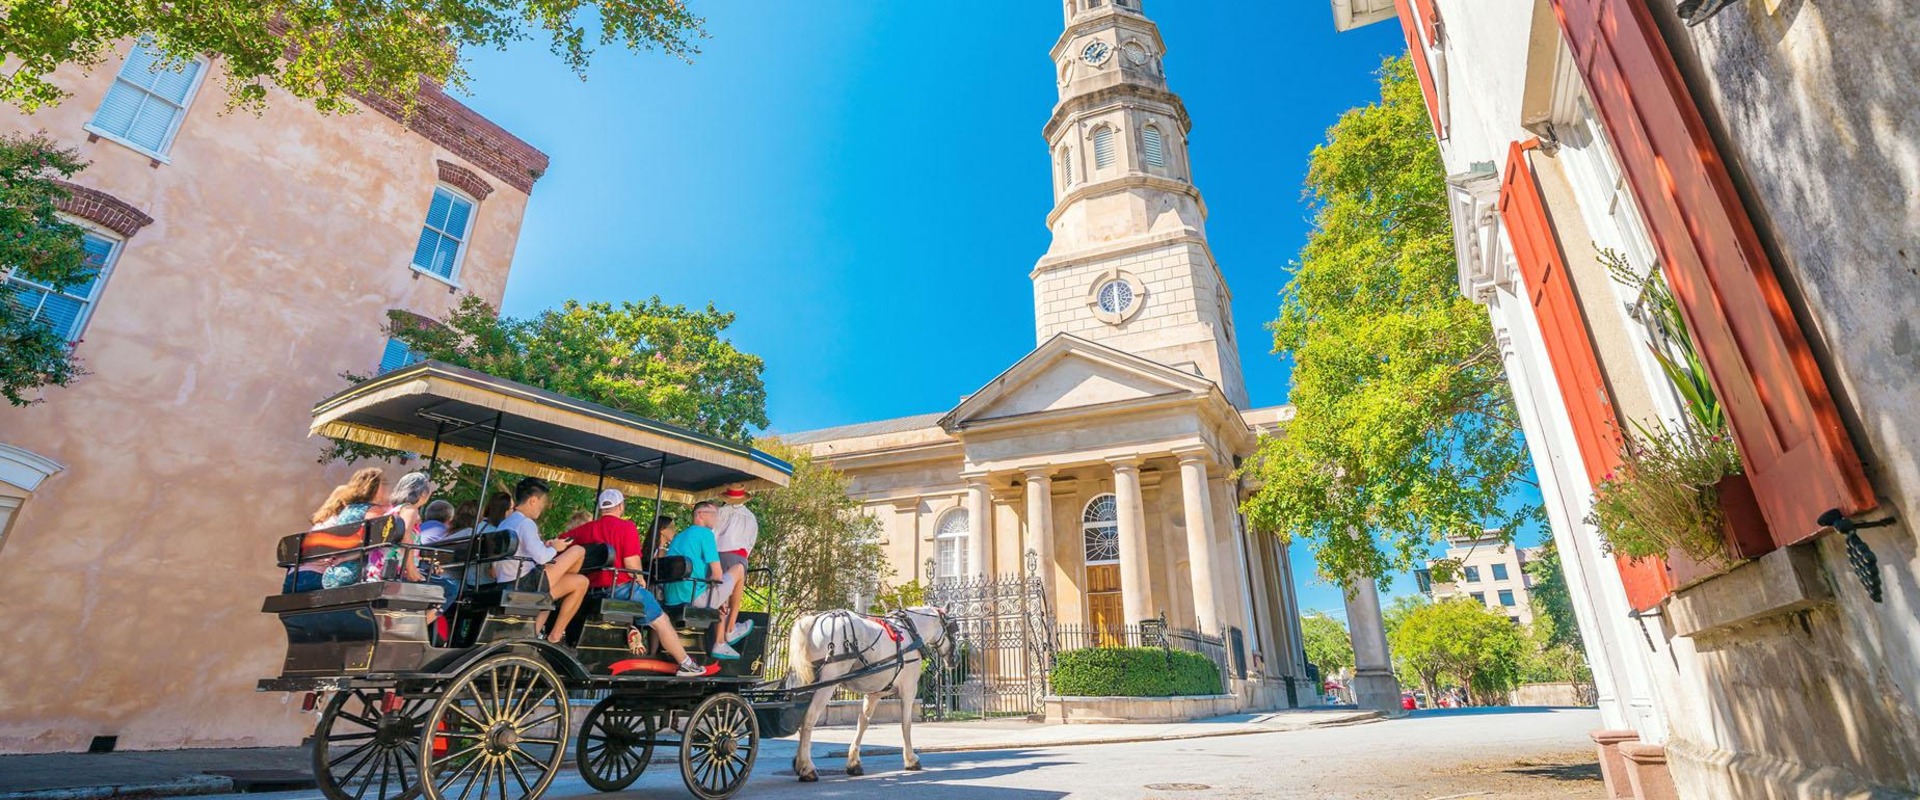 How long is charleston carriage tour?